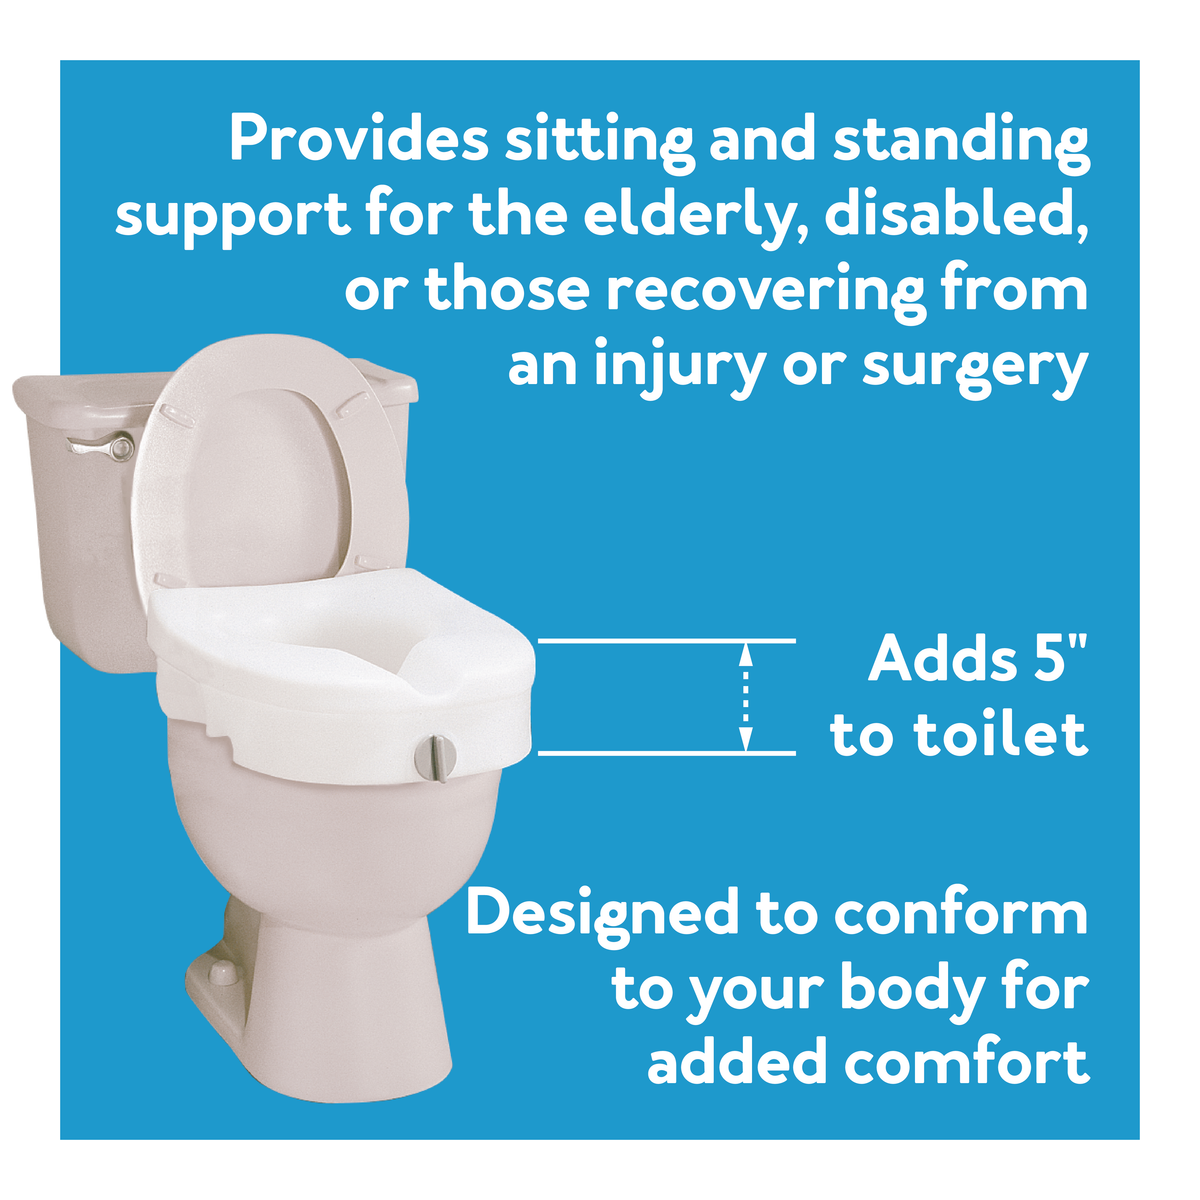 5 toilet seat riser for handicapped and elderly persons , Further details are provided below